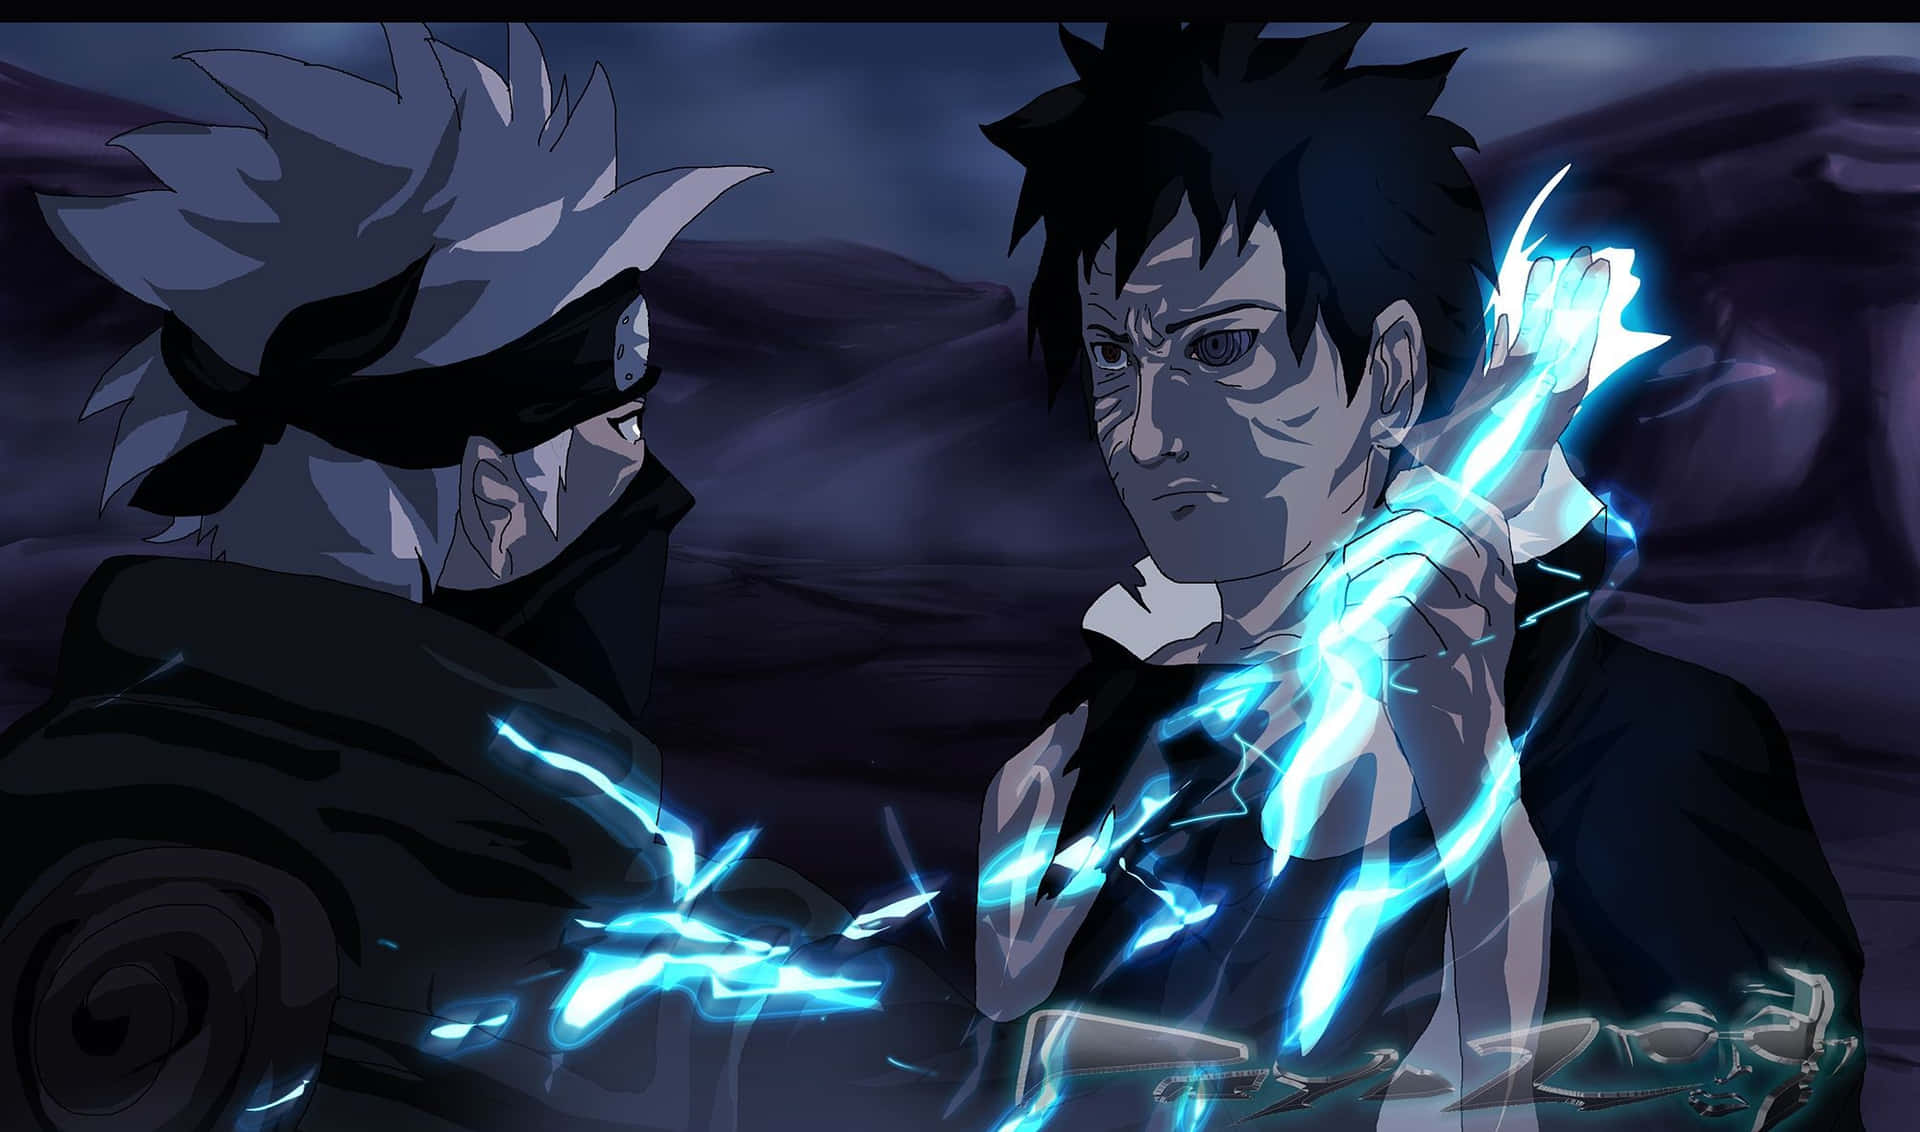 Embracing their shared memories, Kakashi and Obito stand side-by-side. Wallpaper